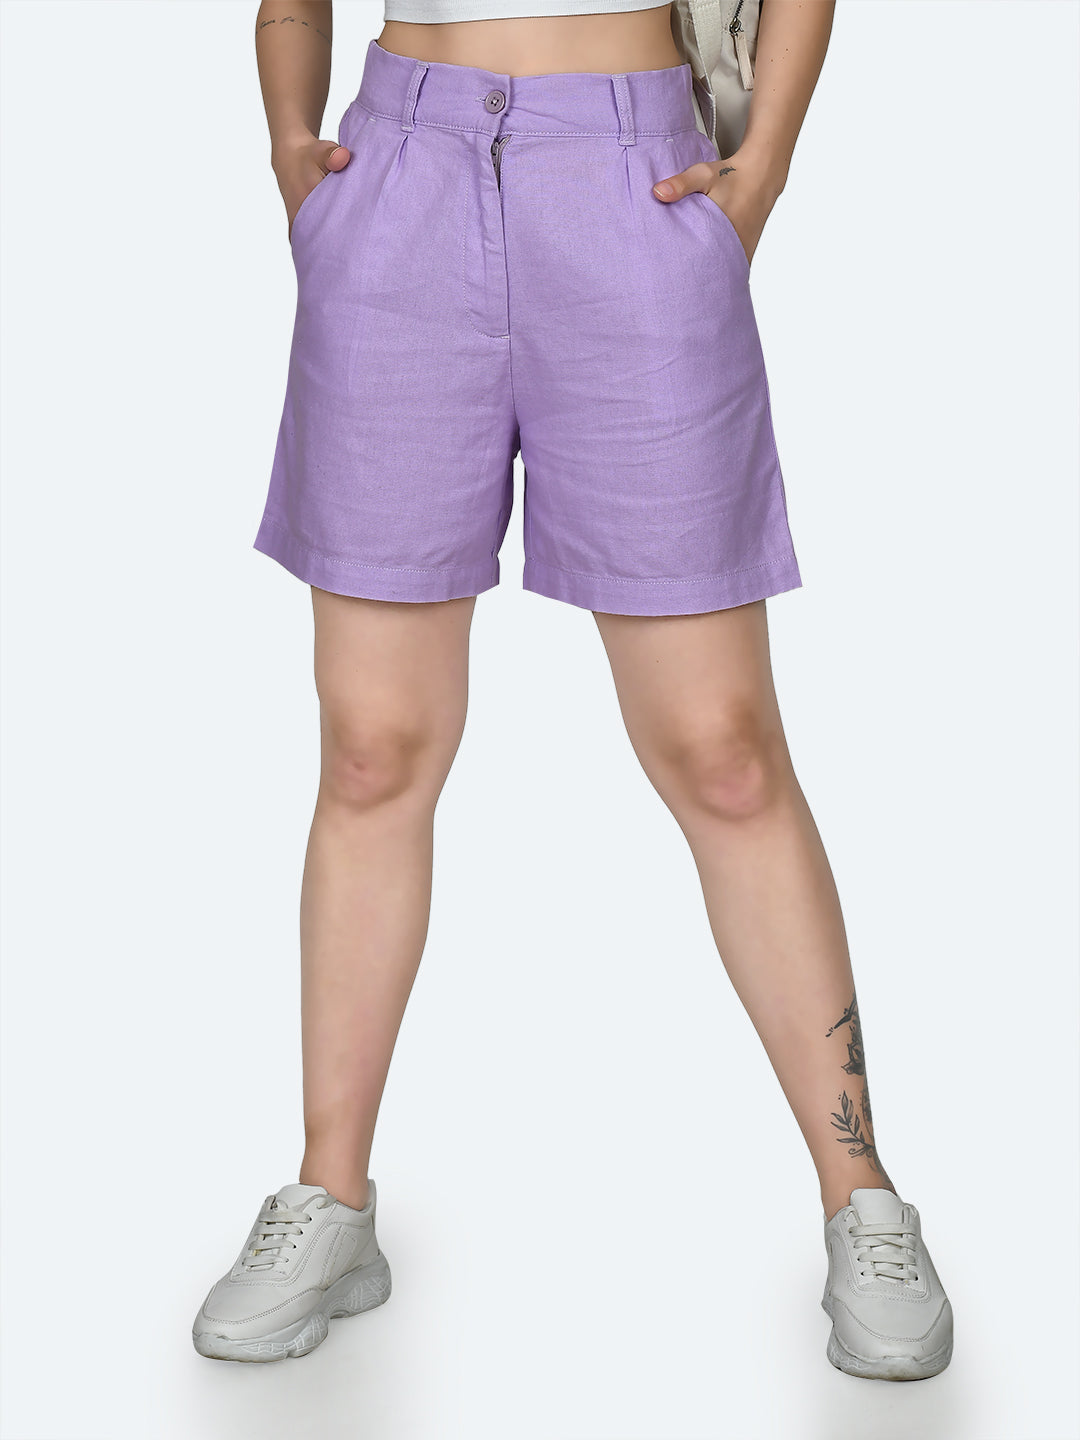 Purple Solid Shorts For Women